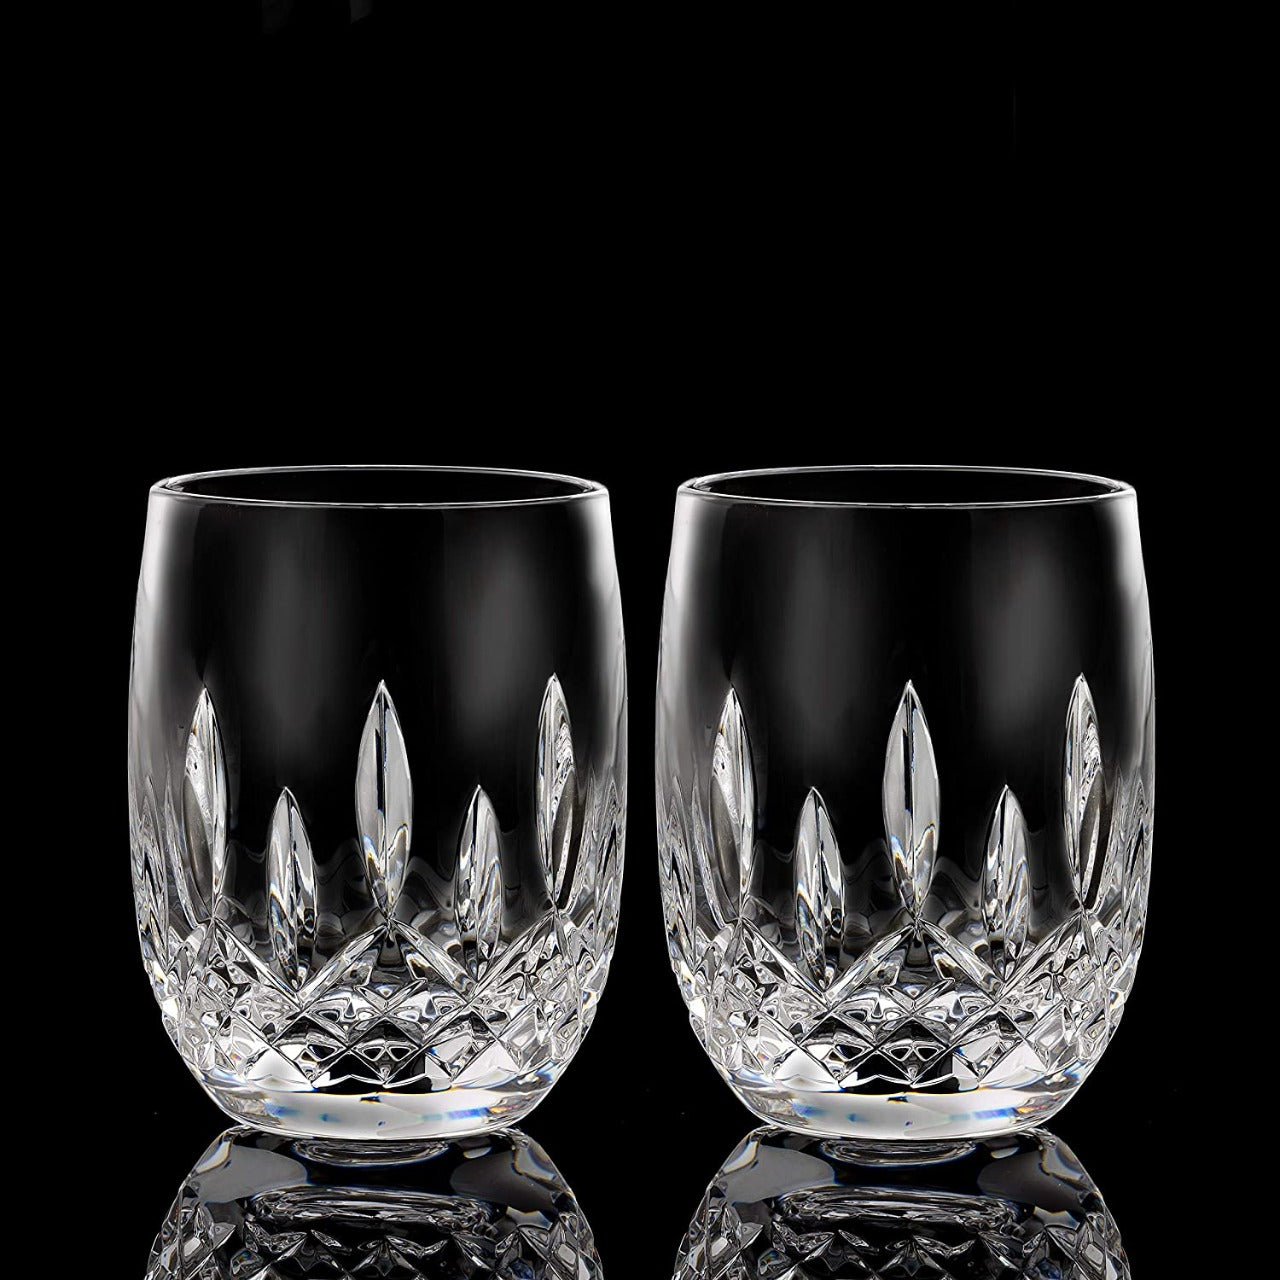  Waterford Crystal Lismore Connoisseur Rounded Tumbler